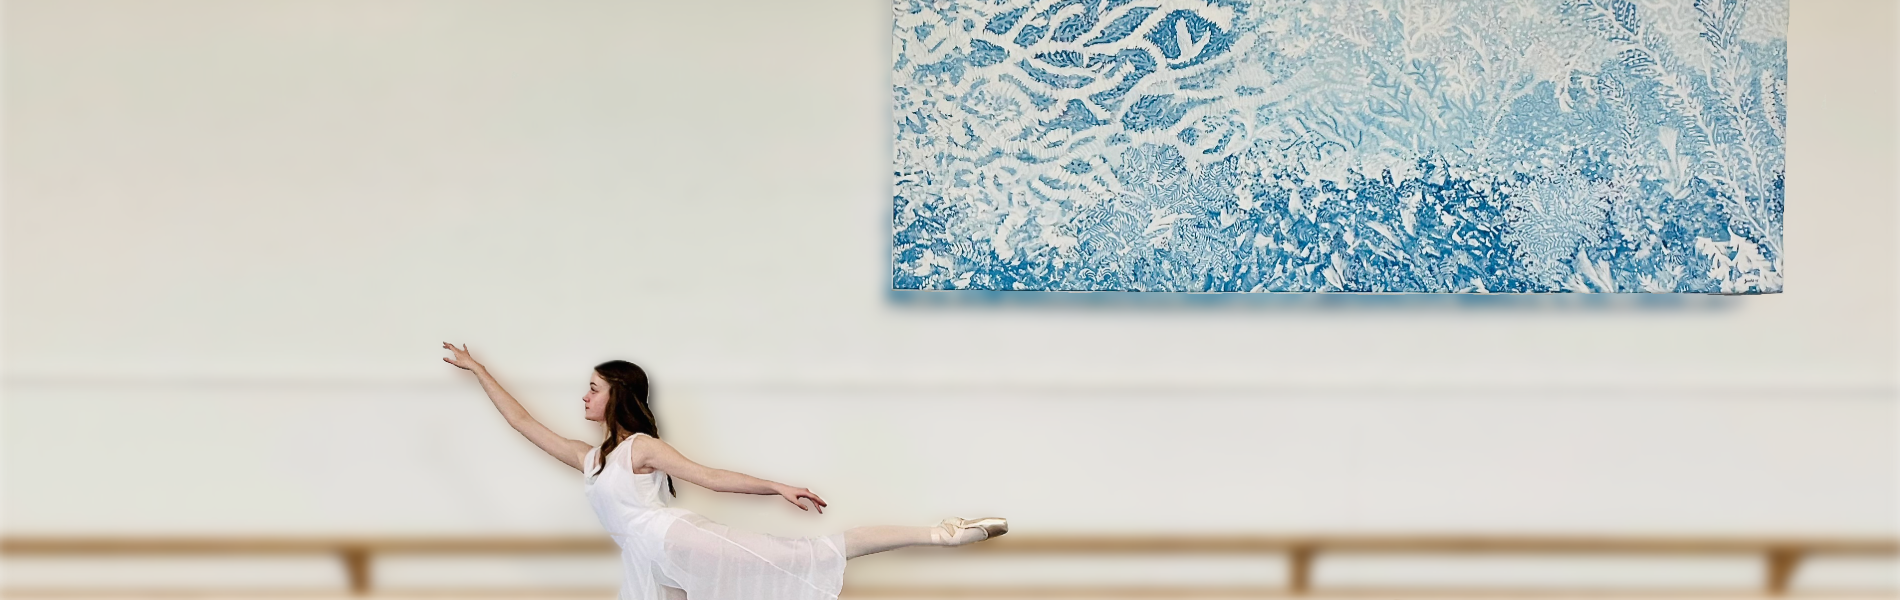 A young ballerina in white posing in front of a ballet barre.